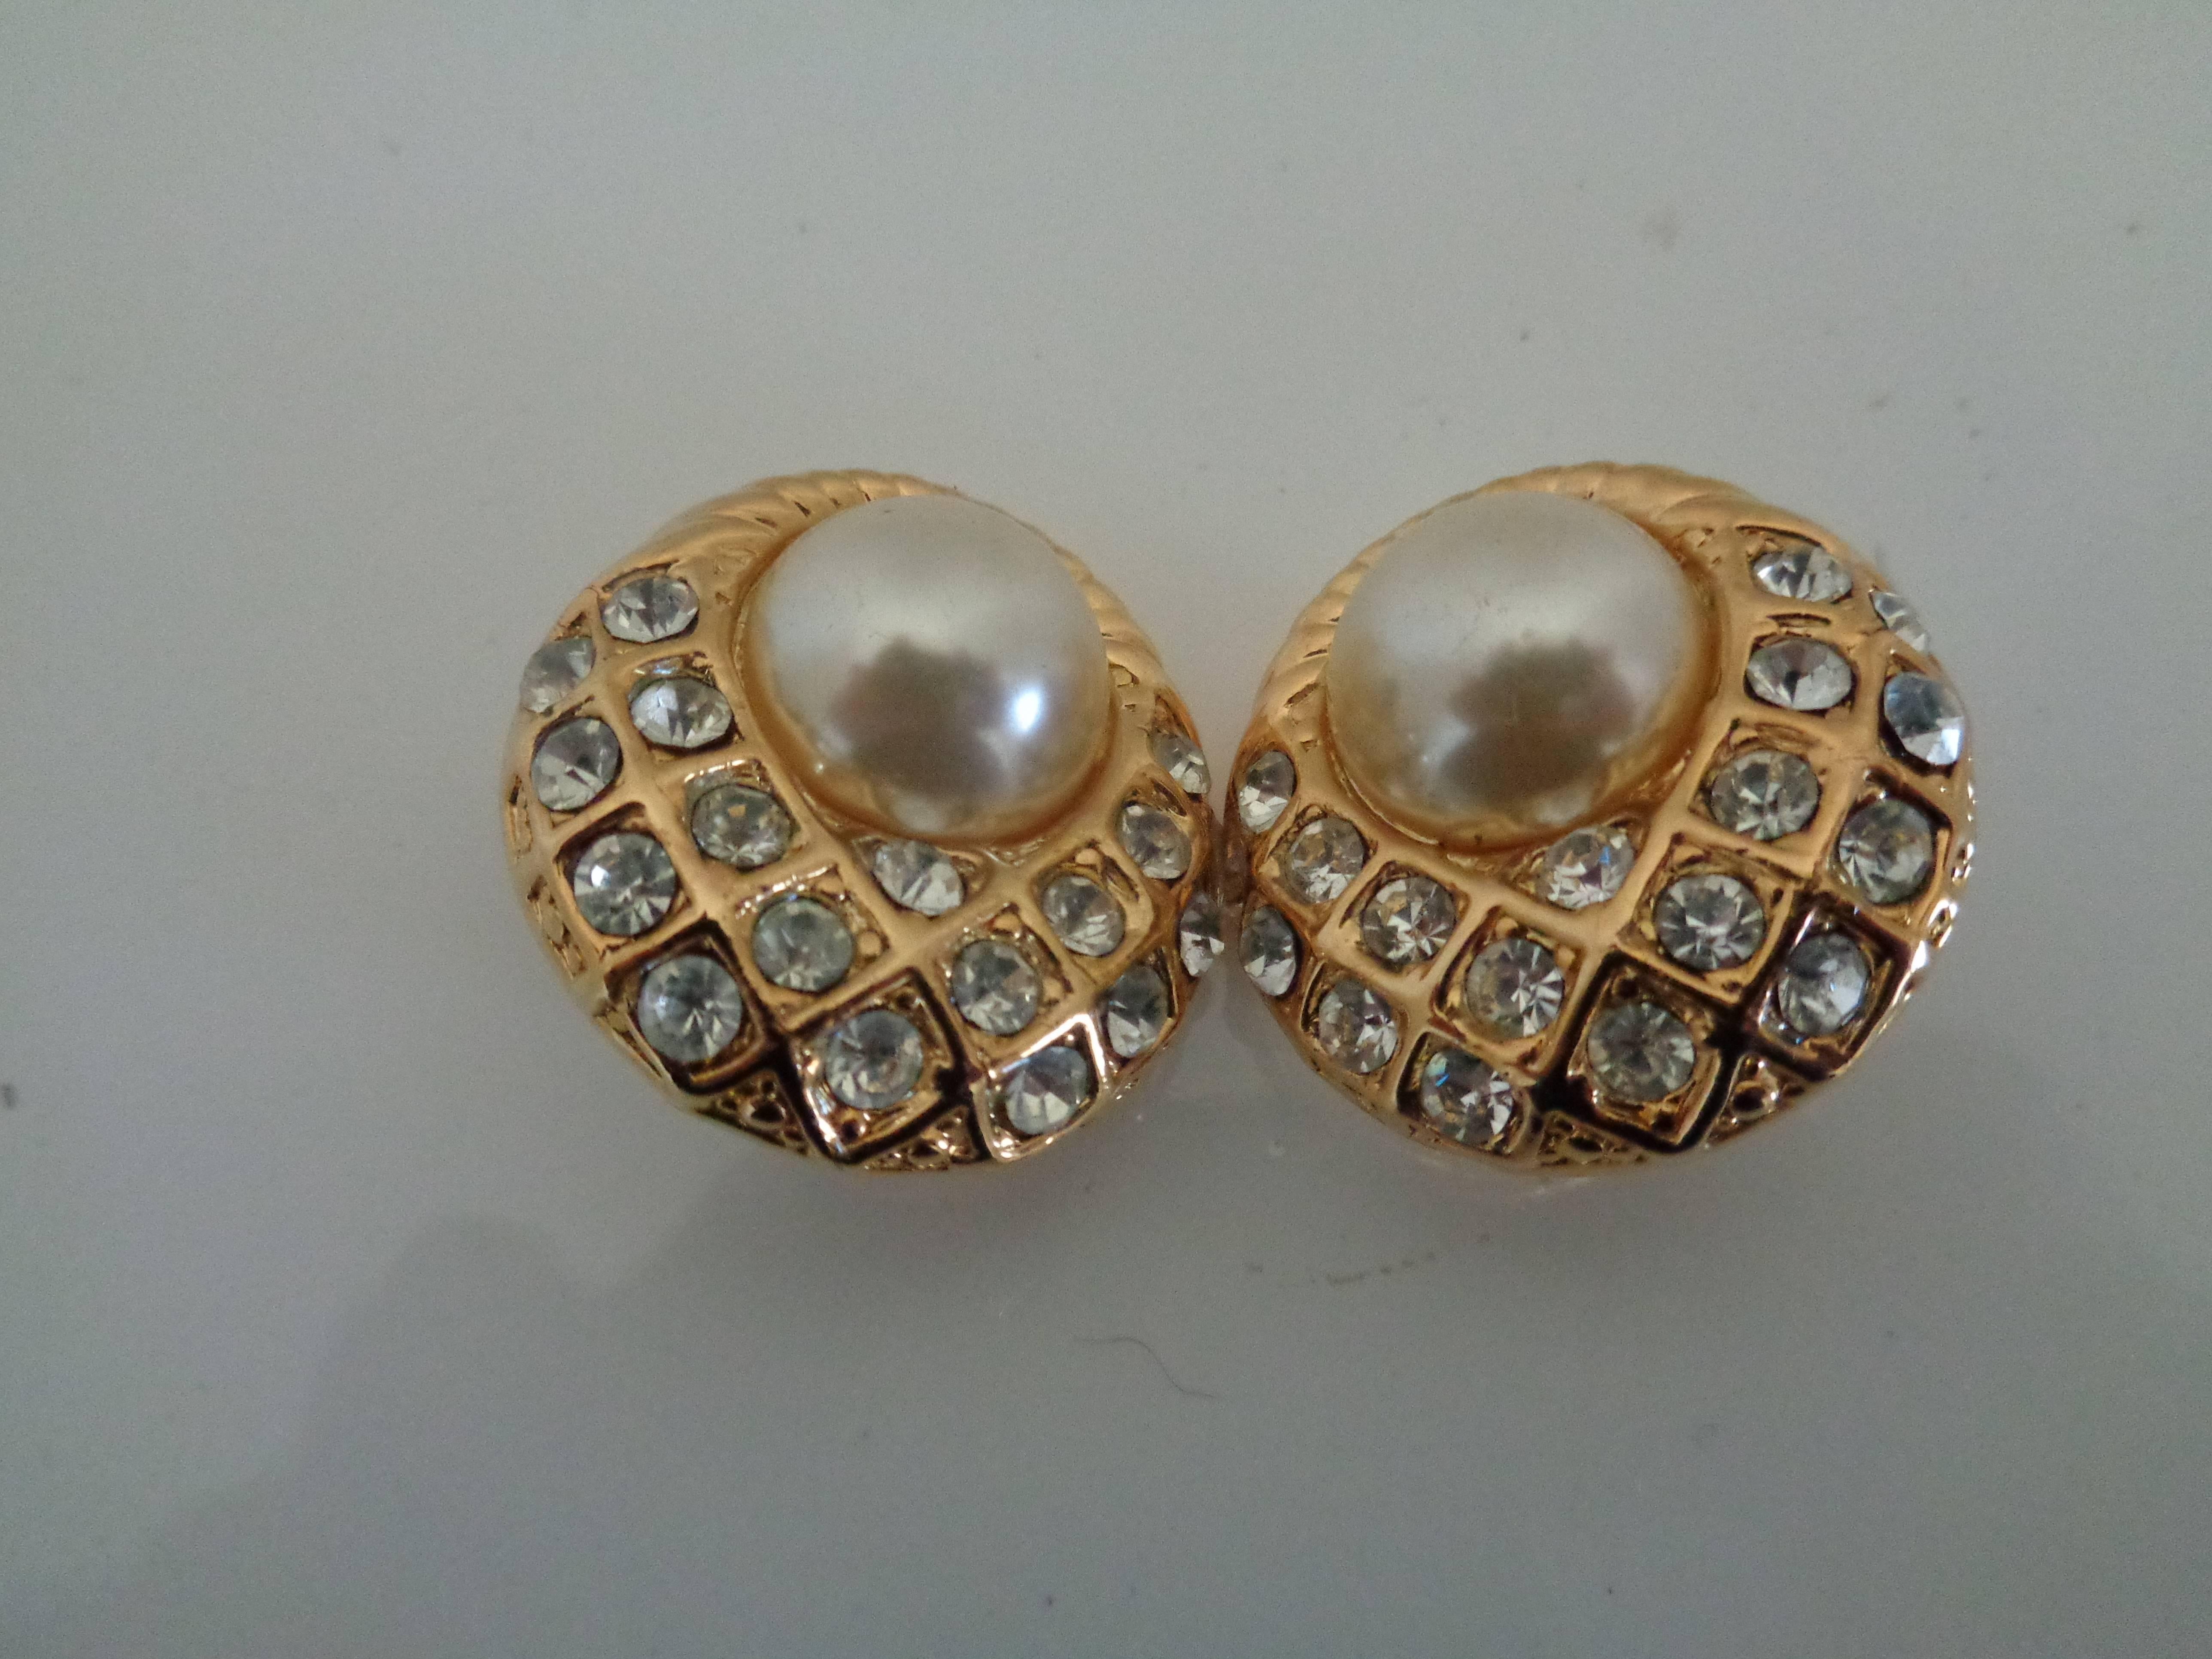 Gold tone faux white pearls with swarovski Clip on earrings
2.5 cm x 2.5 cm